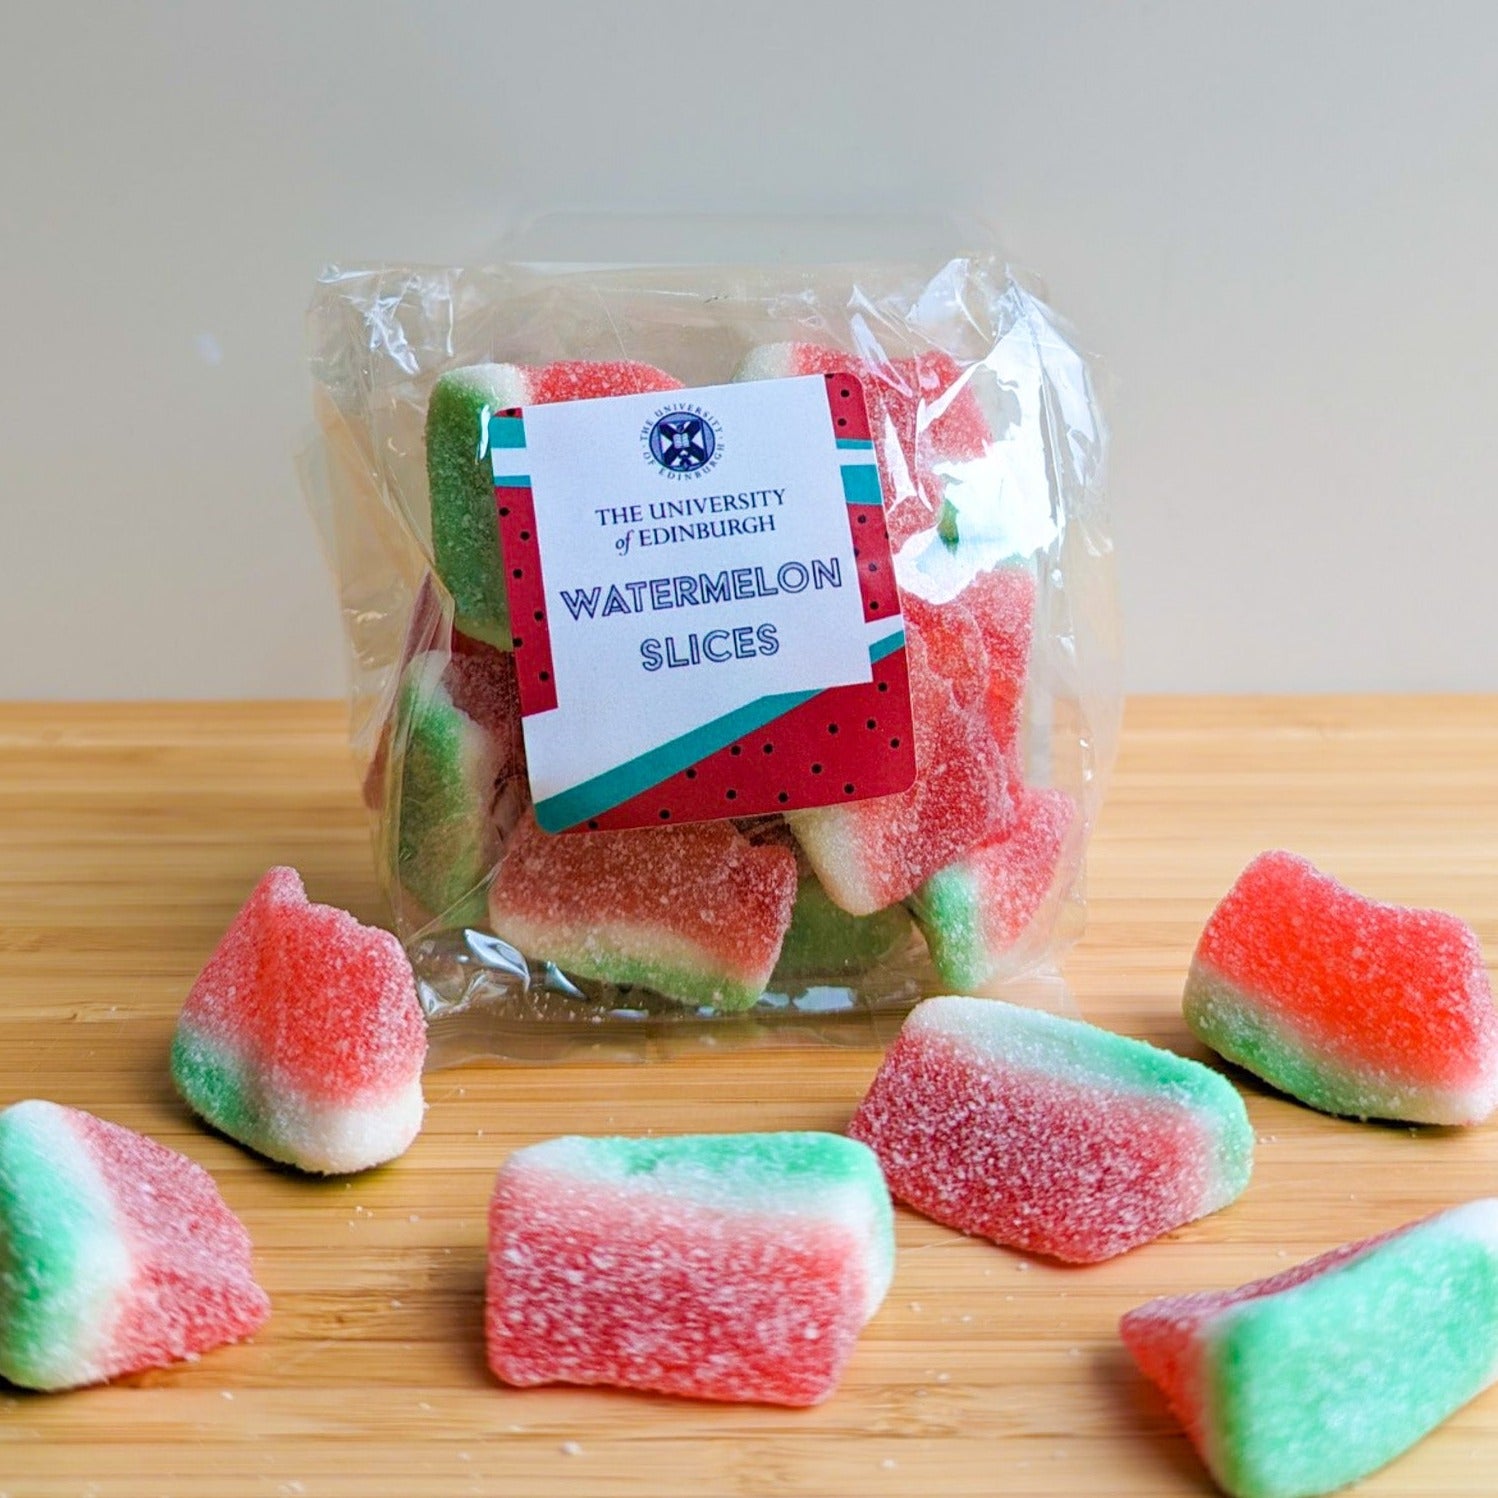 Close up of a plastic bag of Watermelon Slice candies. A few candies are scattered in front of the bag. The University of Edinburgh's Crest is on the candy label.